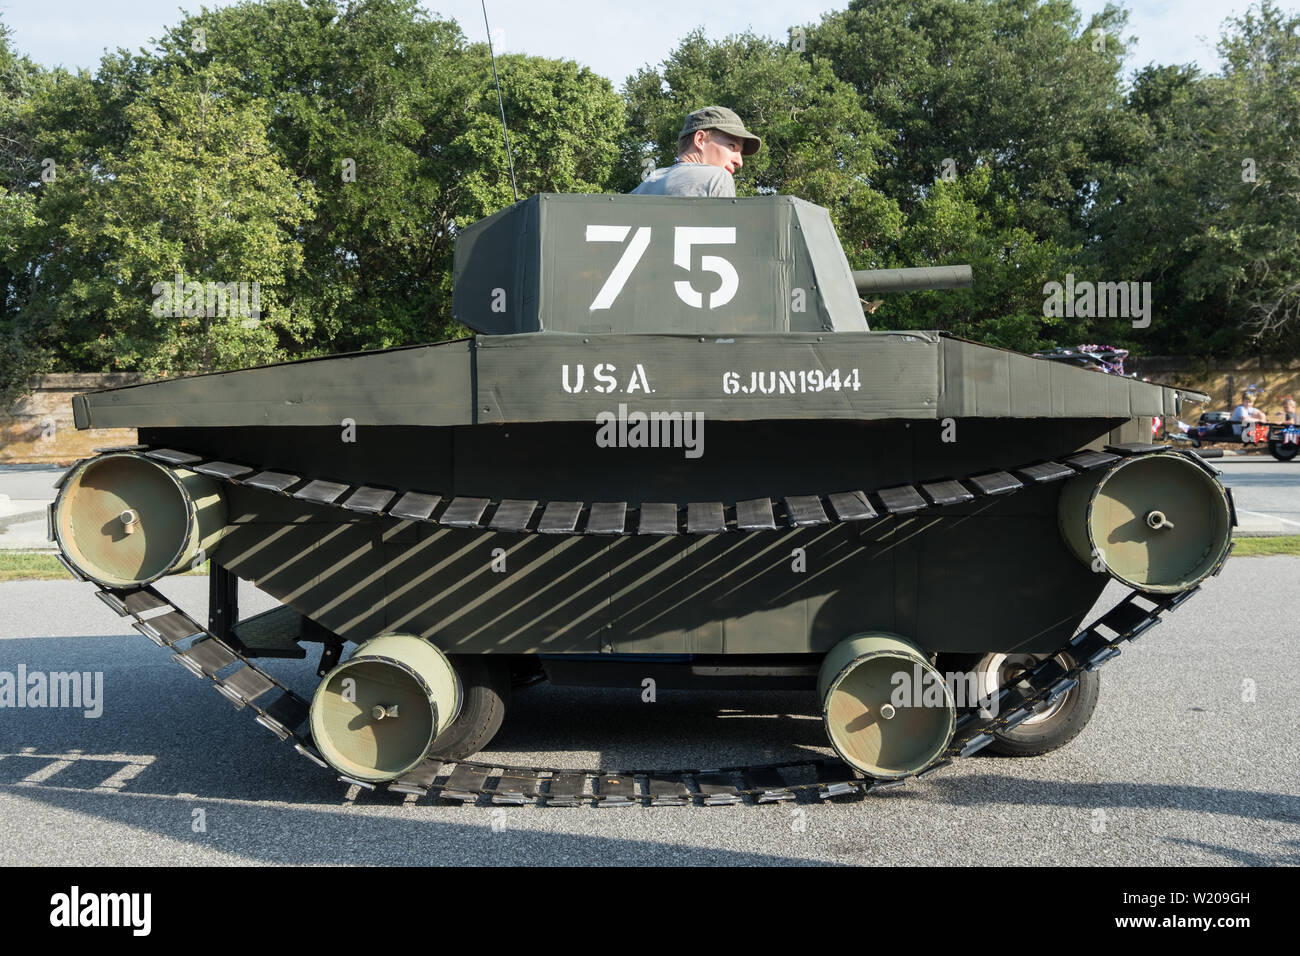 Sullivans Island South Carolina, USA. 4th July, 2019. A golf cart decorated as a military tank takes part in the annual Independence Day parade July 4, 2019 in Sullivan's Island, South Carolina. The tank was a tongue-in-check reference to the controversy over the military parade in Washington. Credit: Planetpix/Alamy Live News Stock Photo